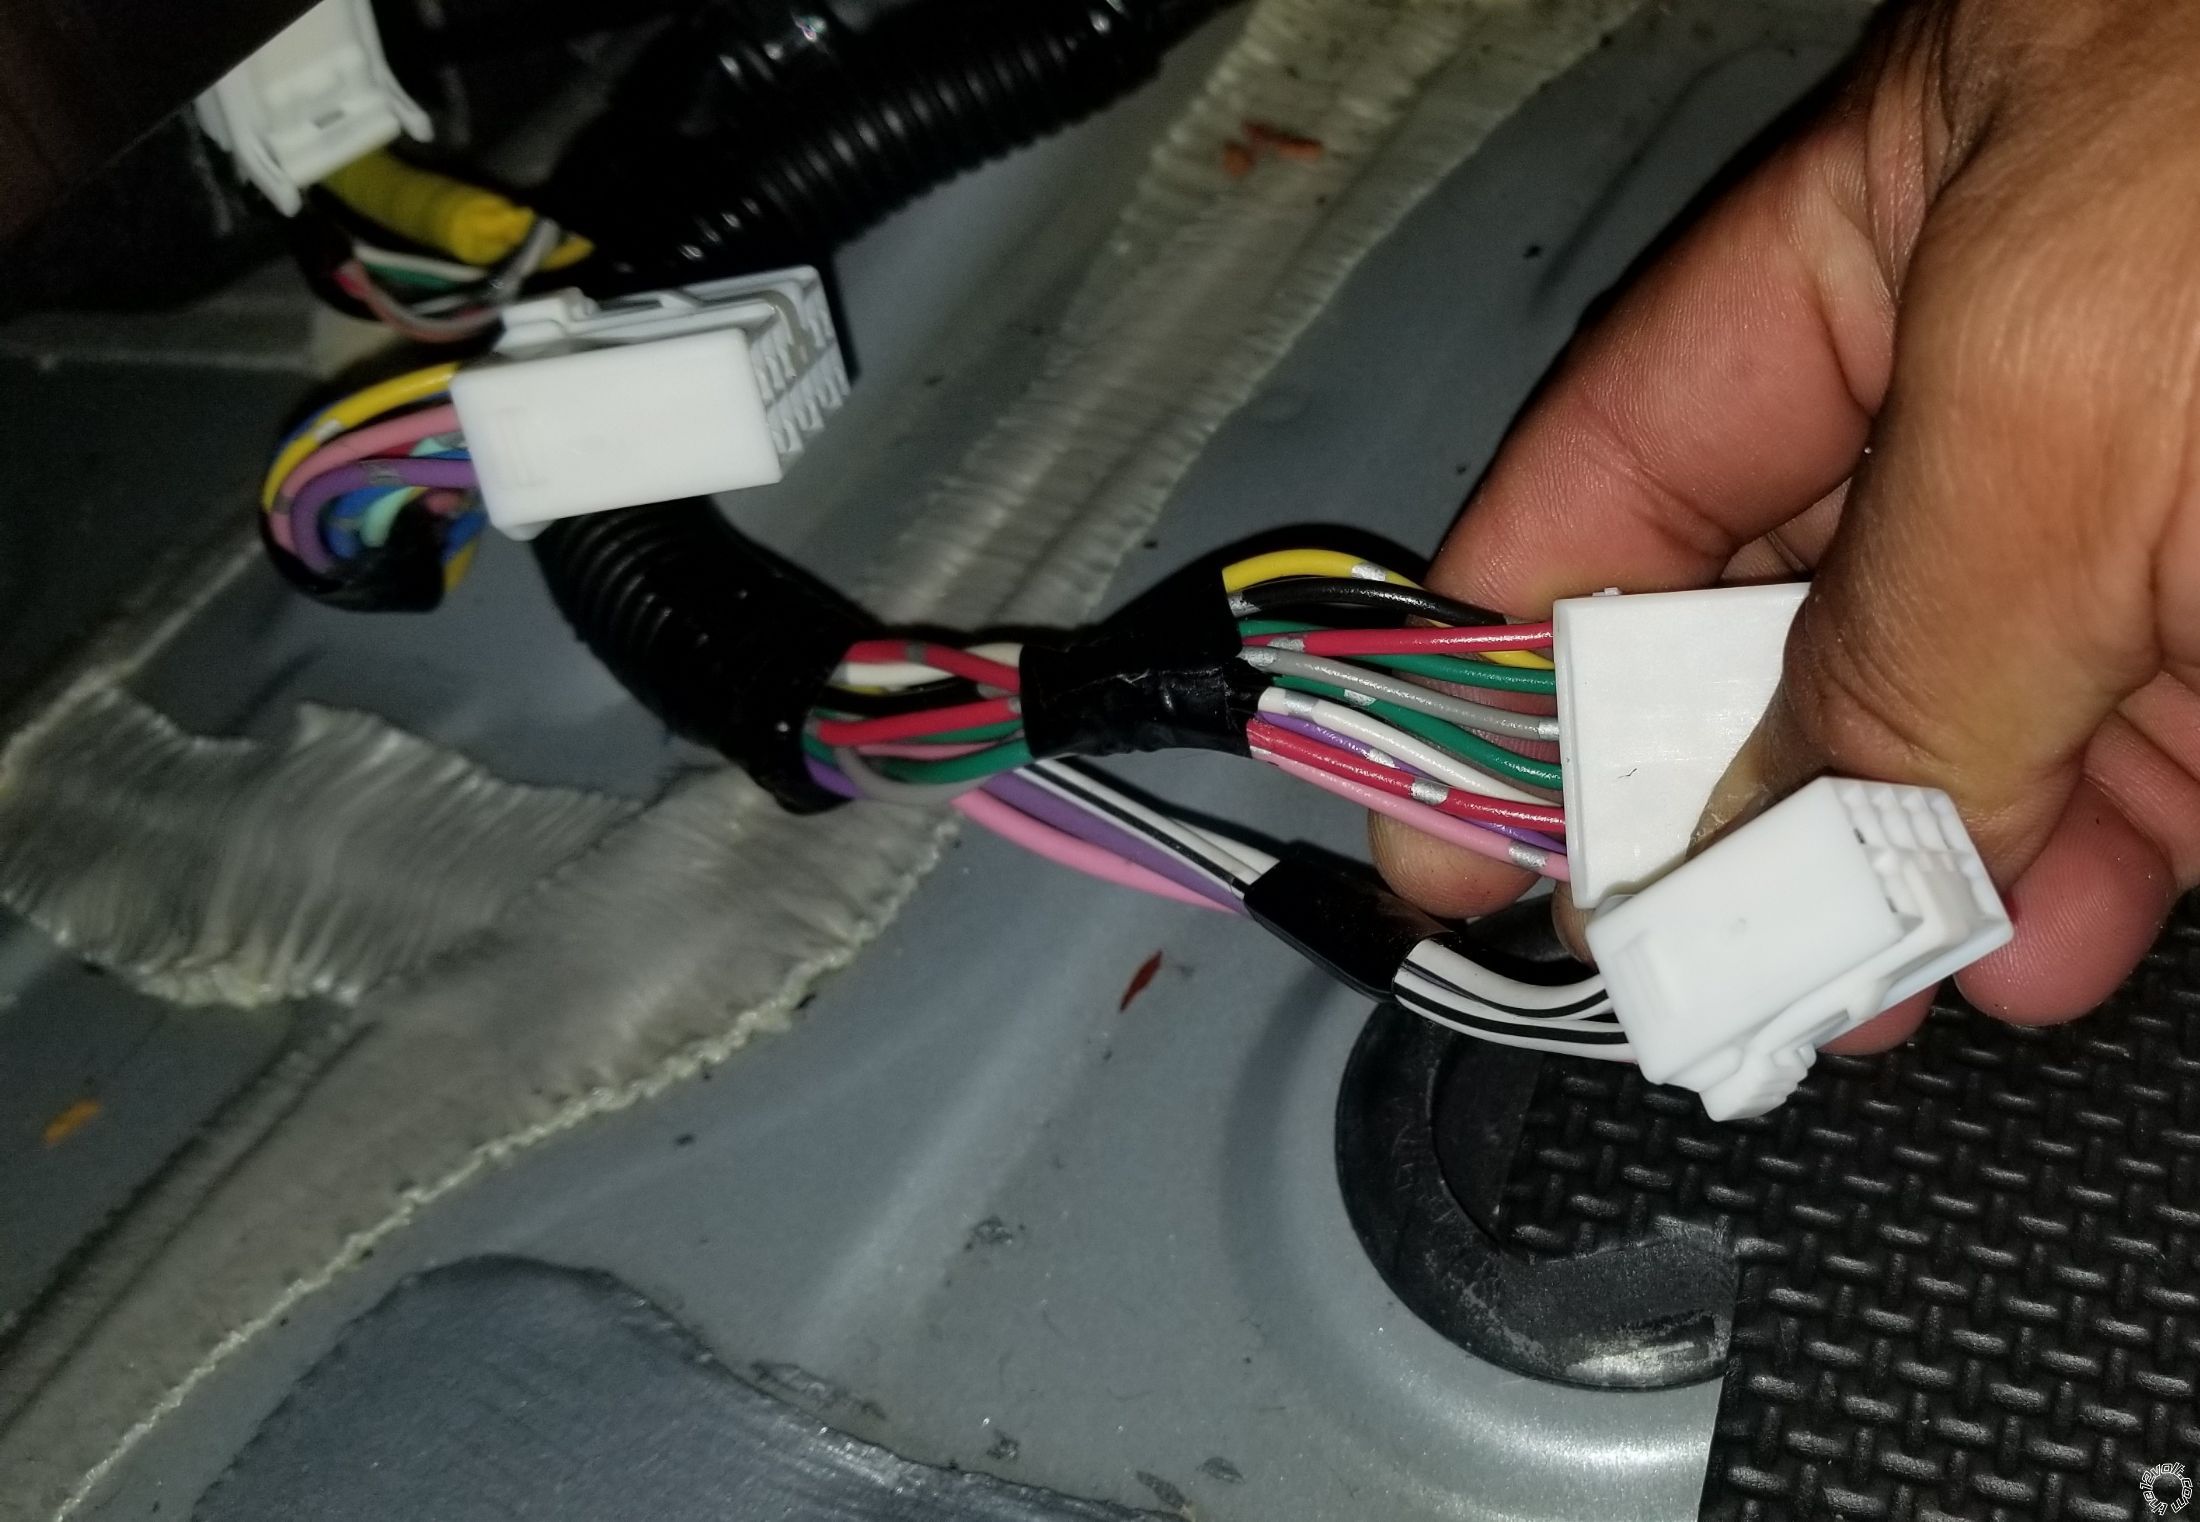 2010 Lexus RX350 Amplifier, Proprietary 12-pin Connector Pinout - Last Post -- posted image.